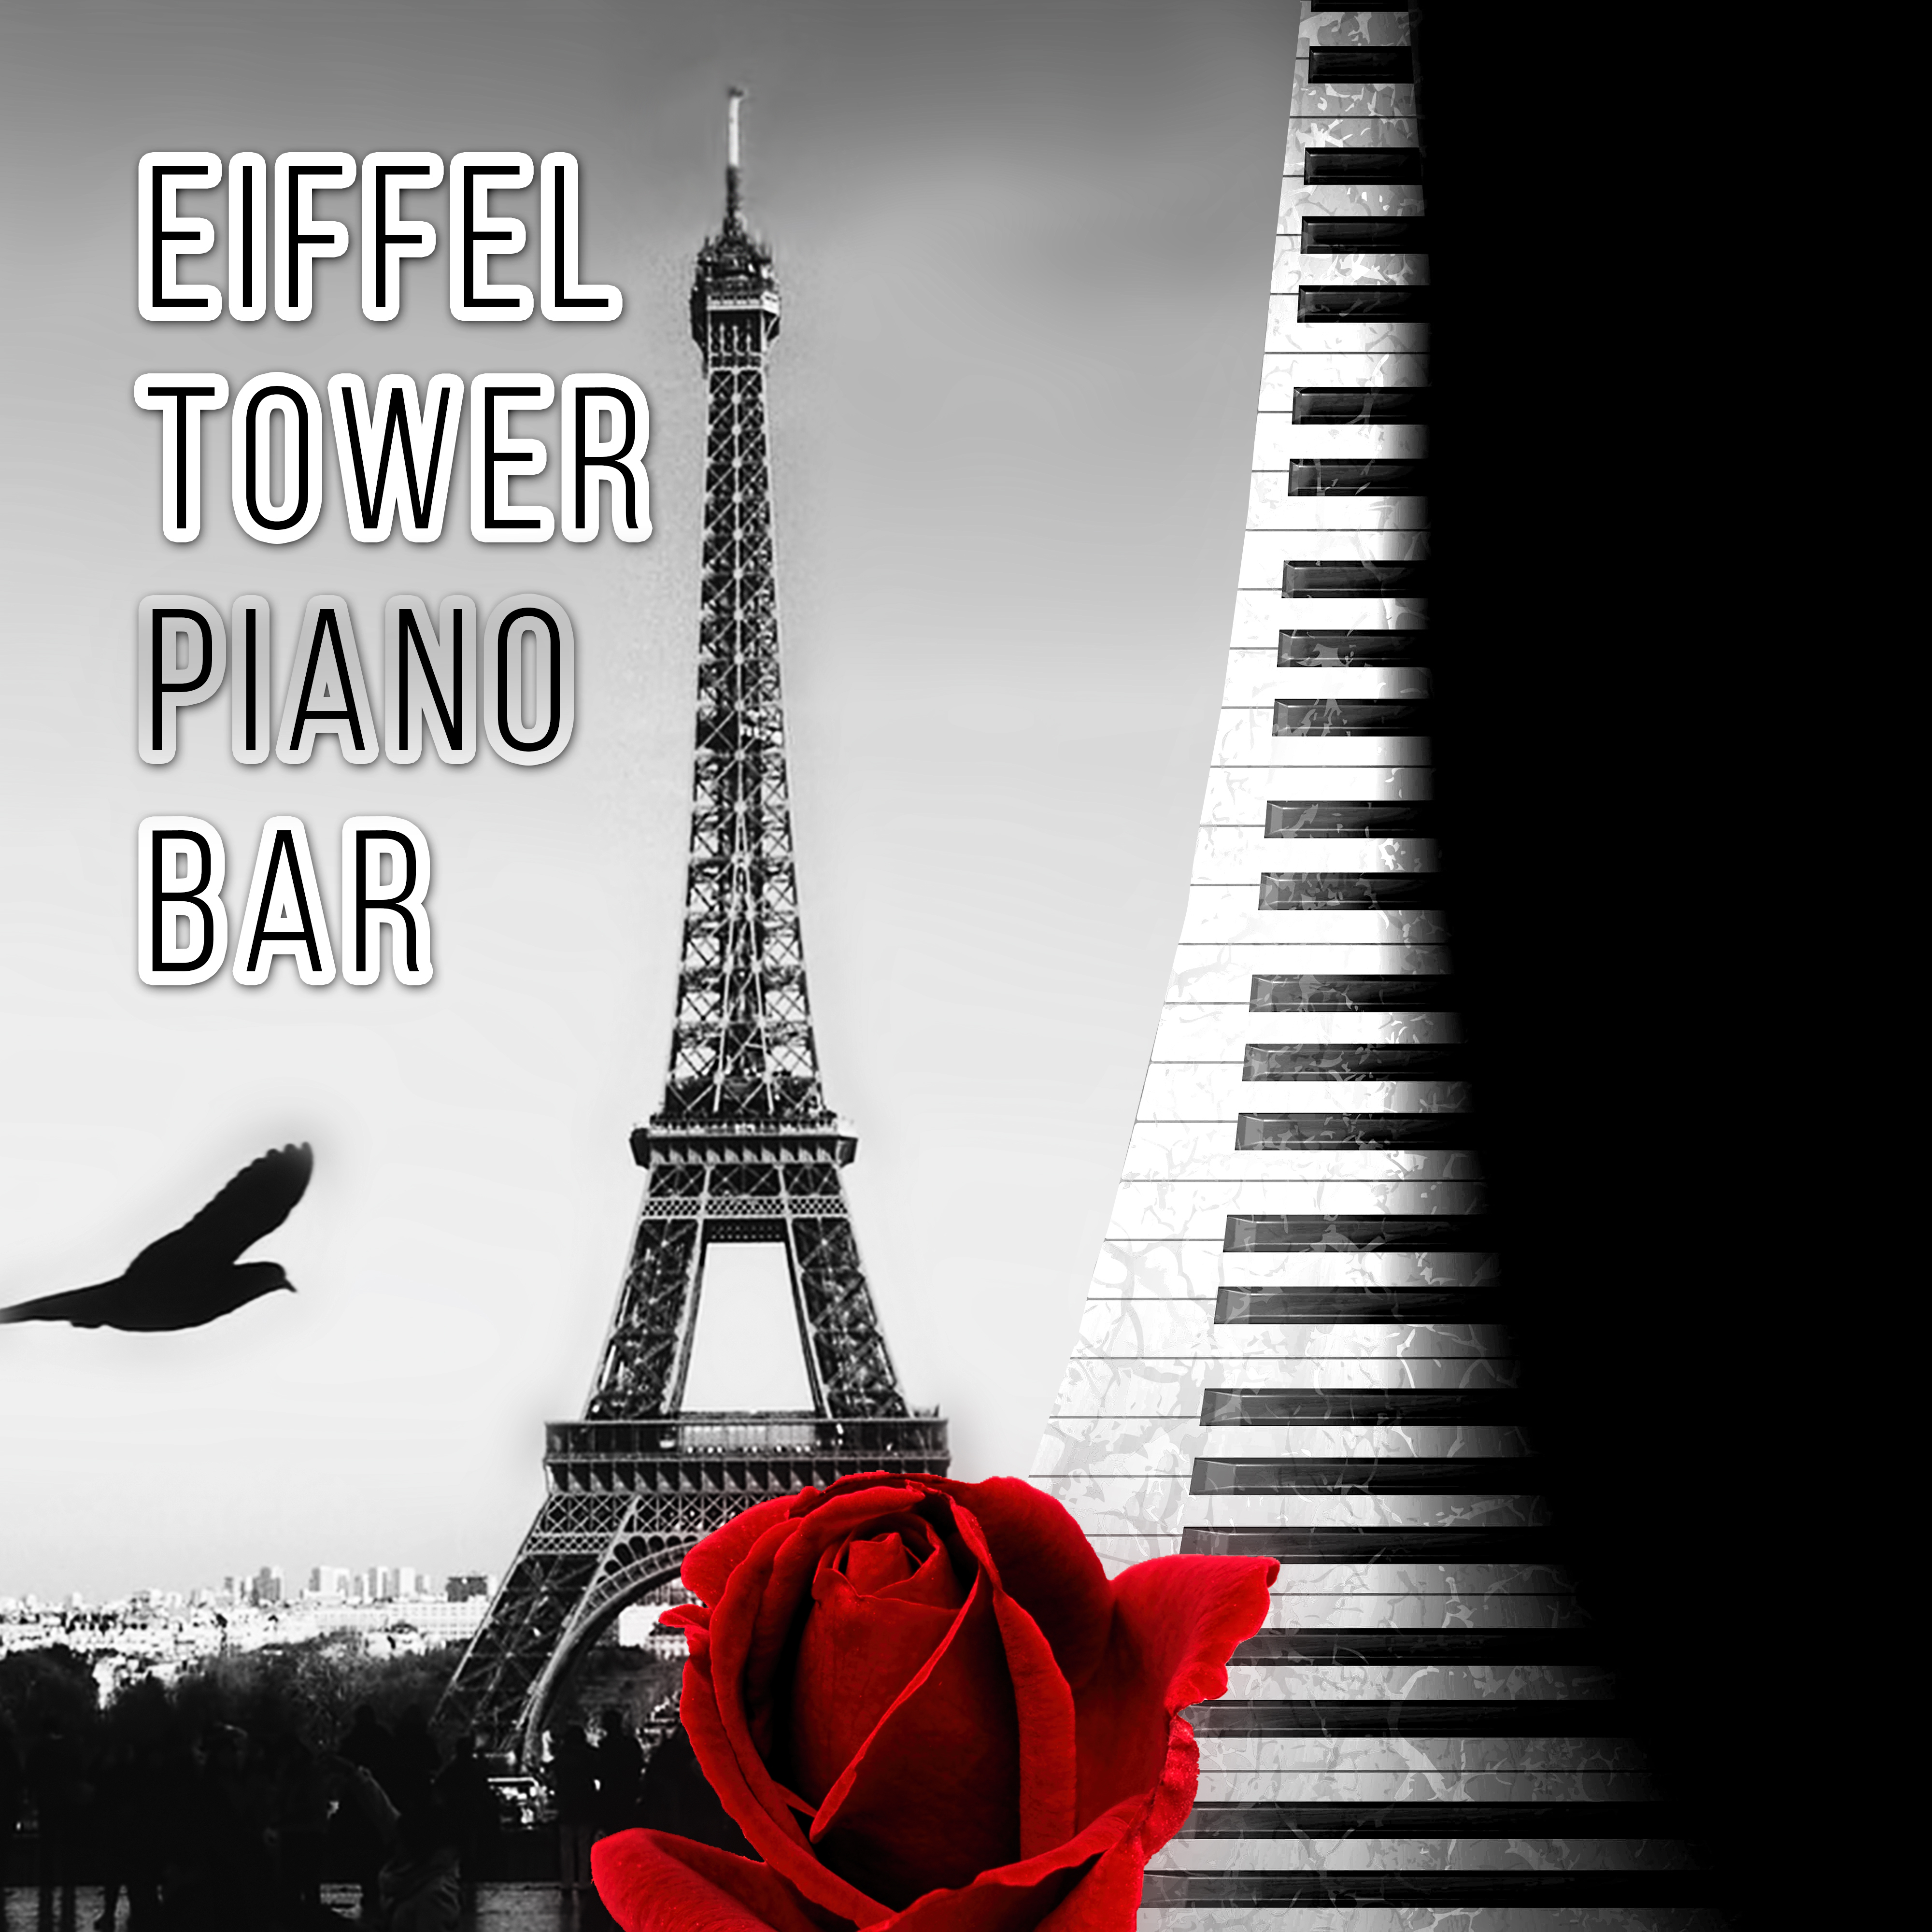 Eiffel Tower - Piano Bar Music, Cafe Paris, The Best Piano Jazz Music for Cocktail Party & Romantic Dinner Time, Chillout Music to Relax